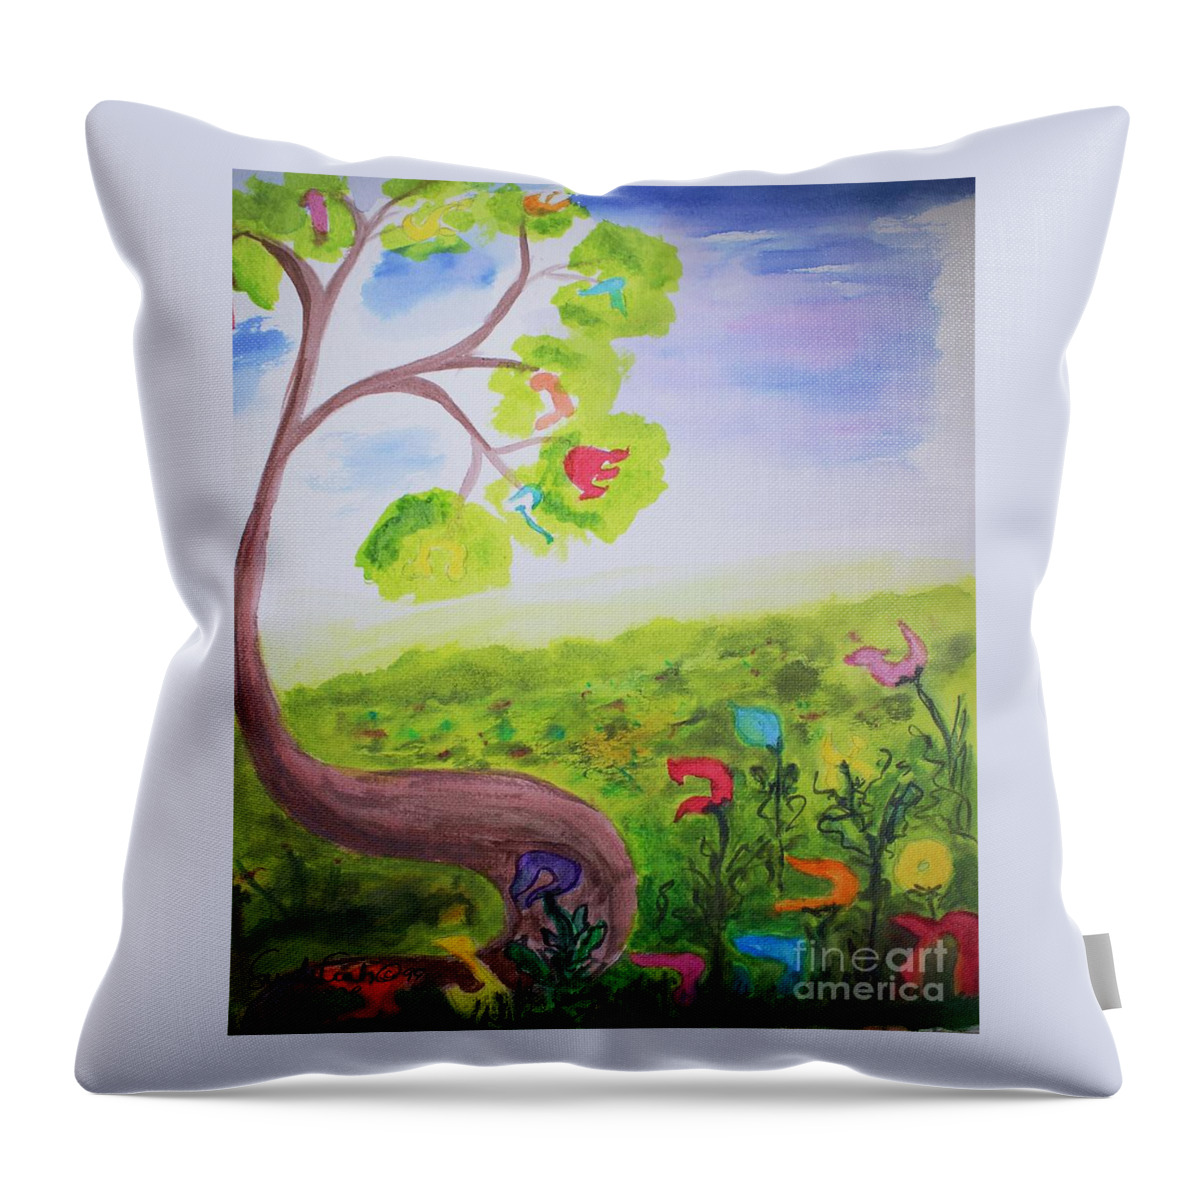 Lamed Learning Tree Lamed Learning To Learn To Teach Hagigah Rashi Tower Flying Air Talmud Judaica Hebrew Letters Jewish Throw Pillow featuring the painting Lamed Learning Tree by Hebrewletters SL